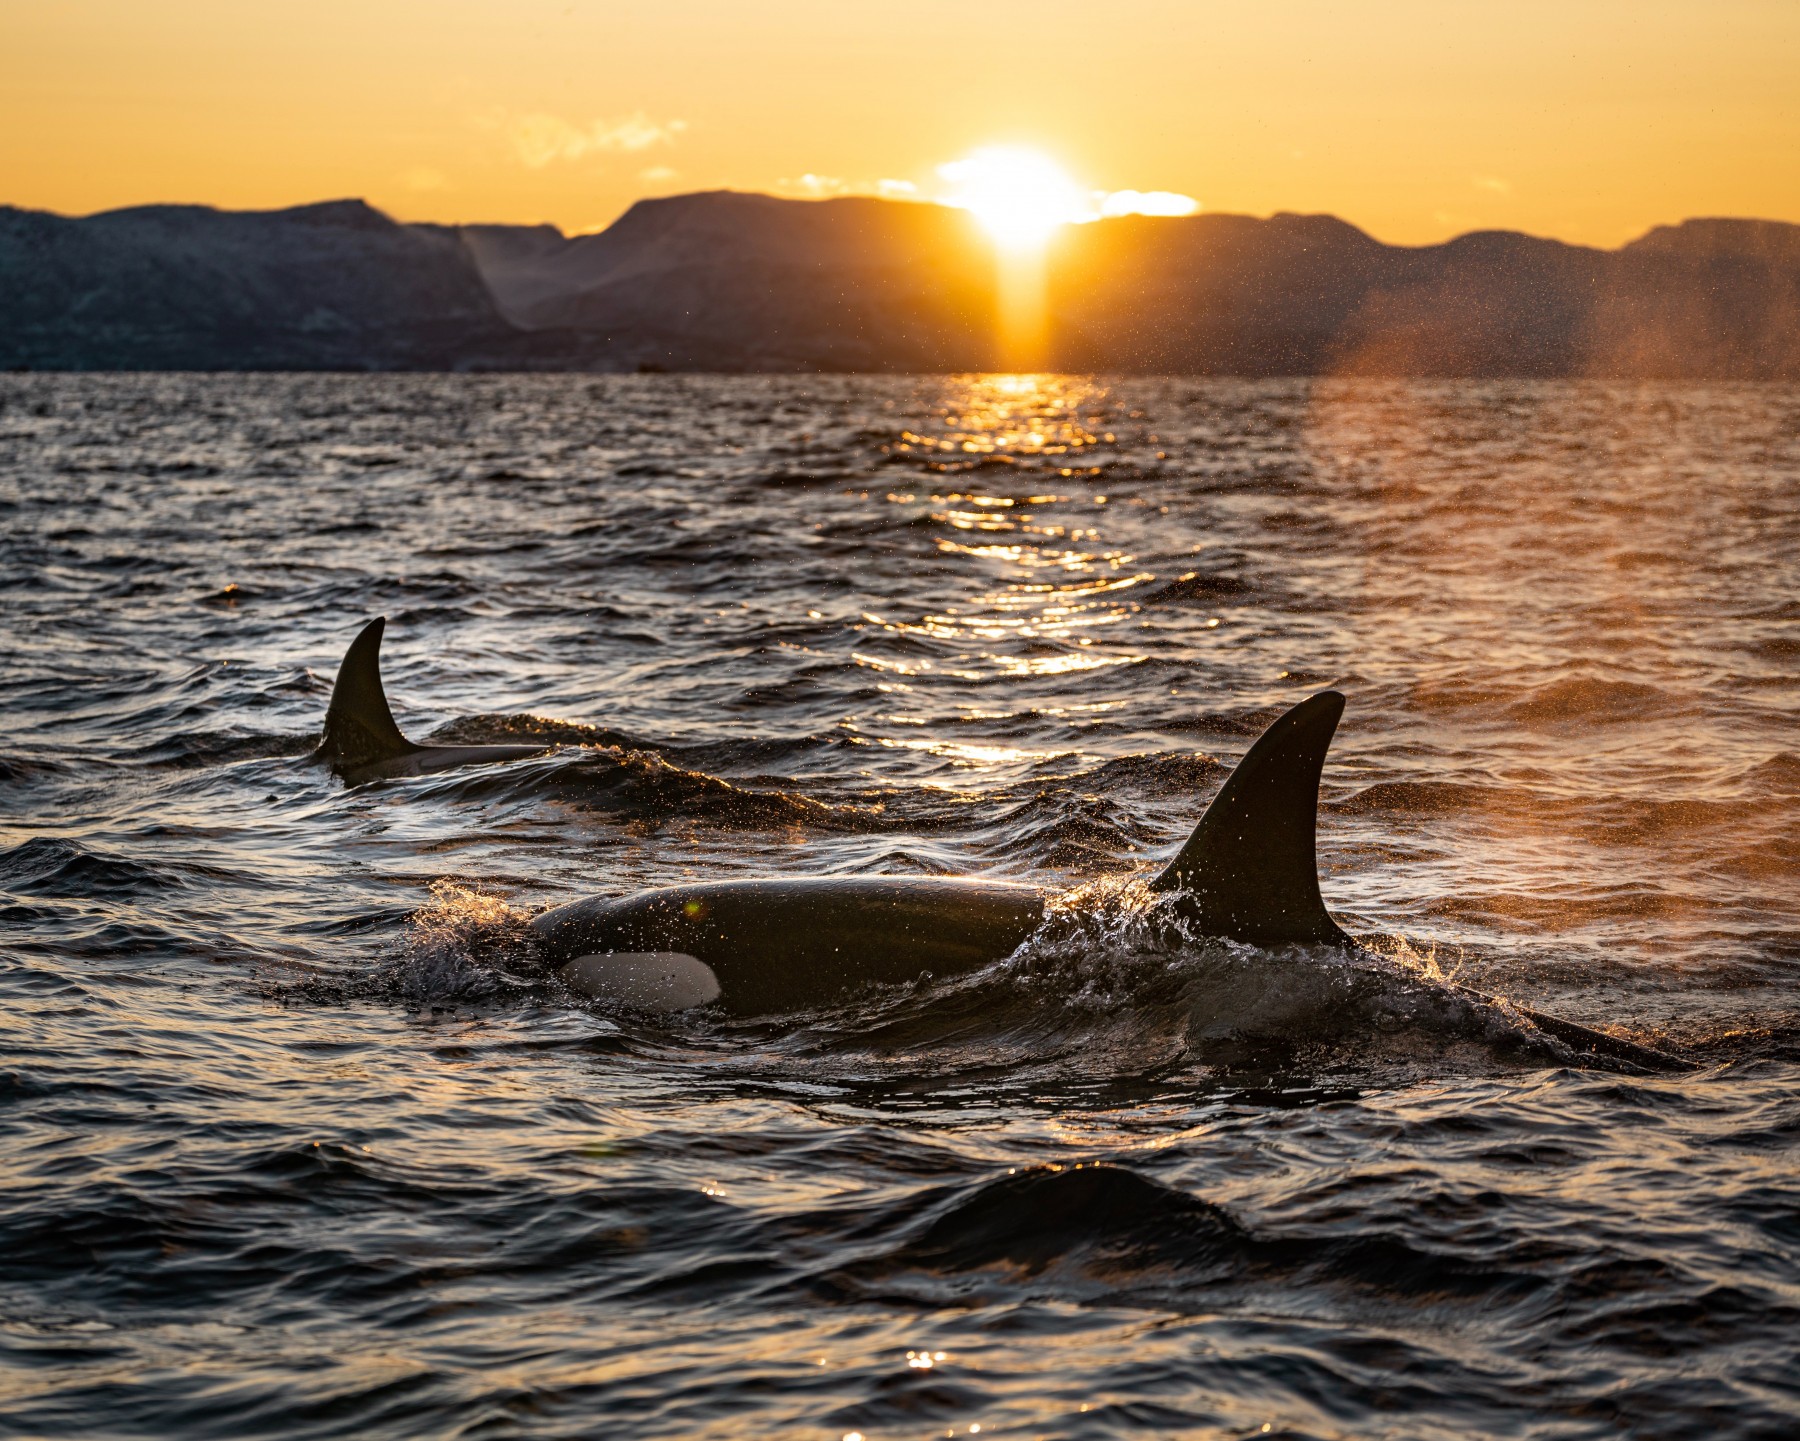 Two orca whales swimming in the ocean with the sun setting in the background.